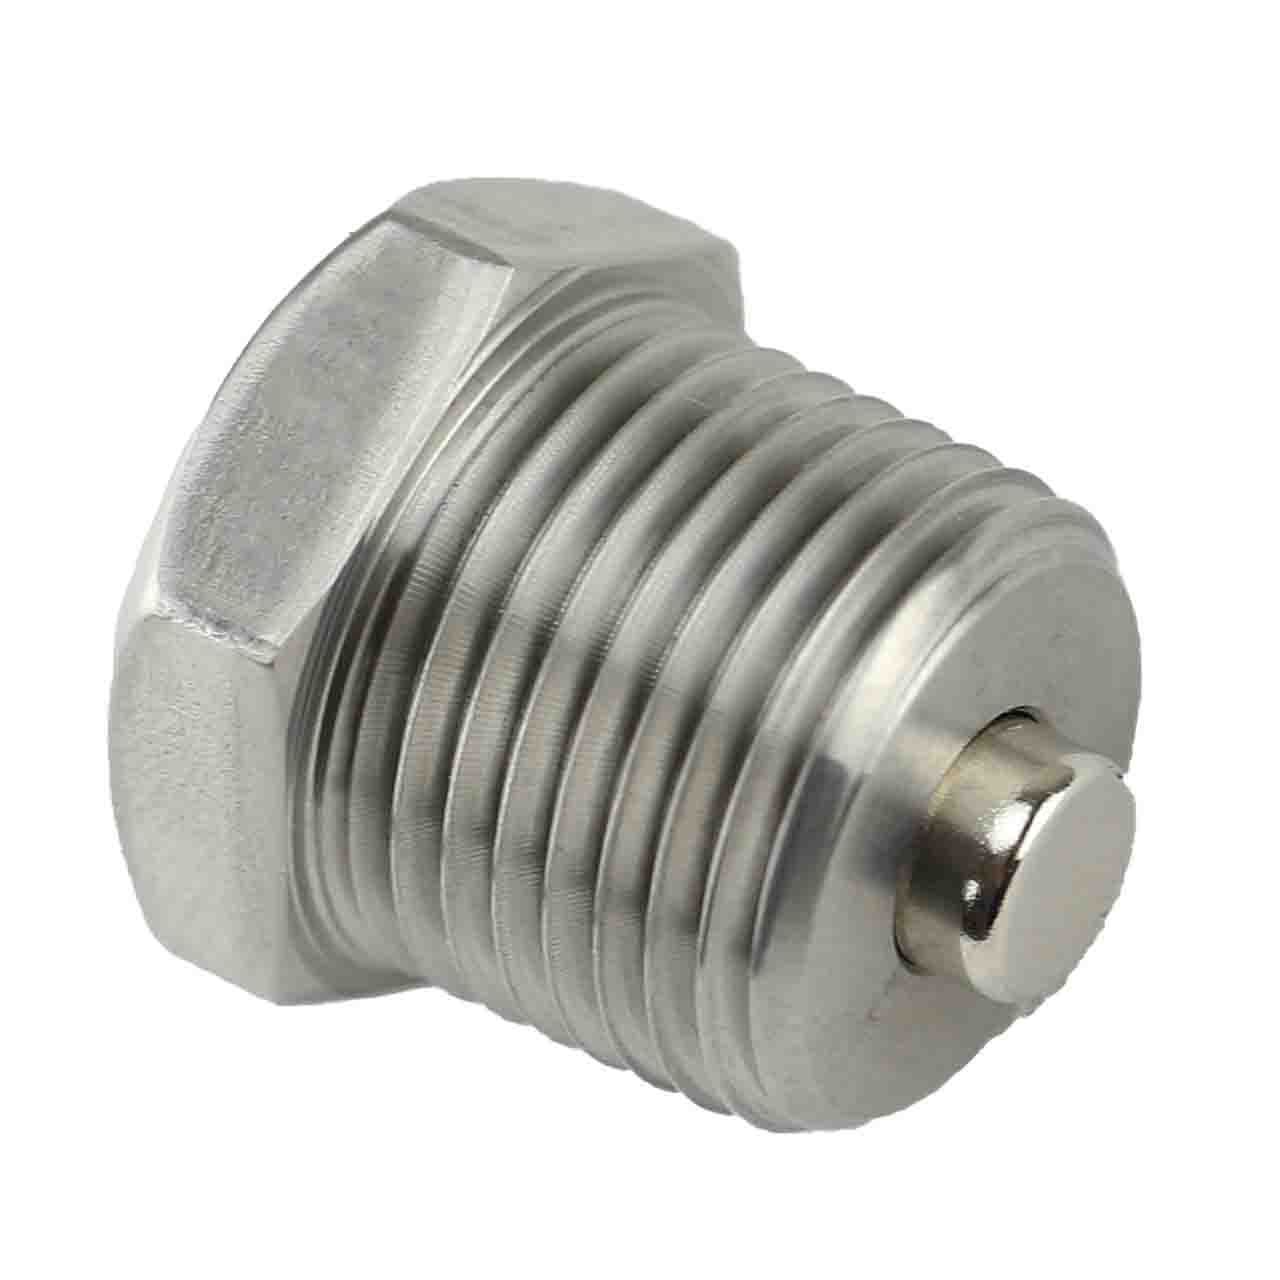 3/8"-18 NPT Stainless Steel Industrial (External Head) ENGINE Oil Drain Plug with Neodymium Magnet - MADE IN USA